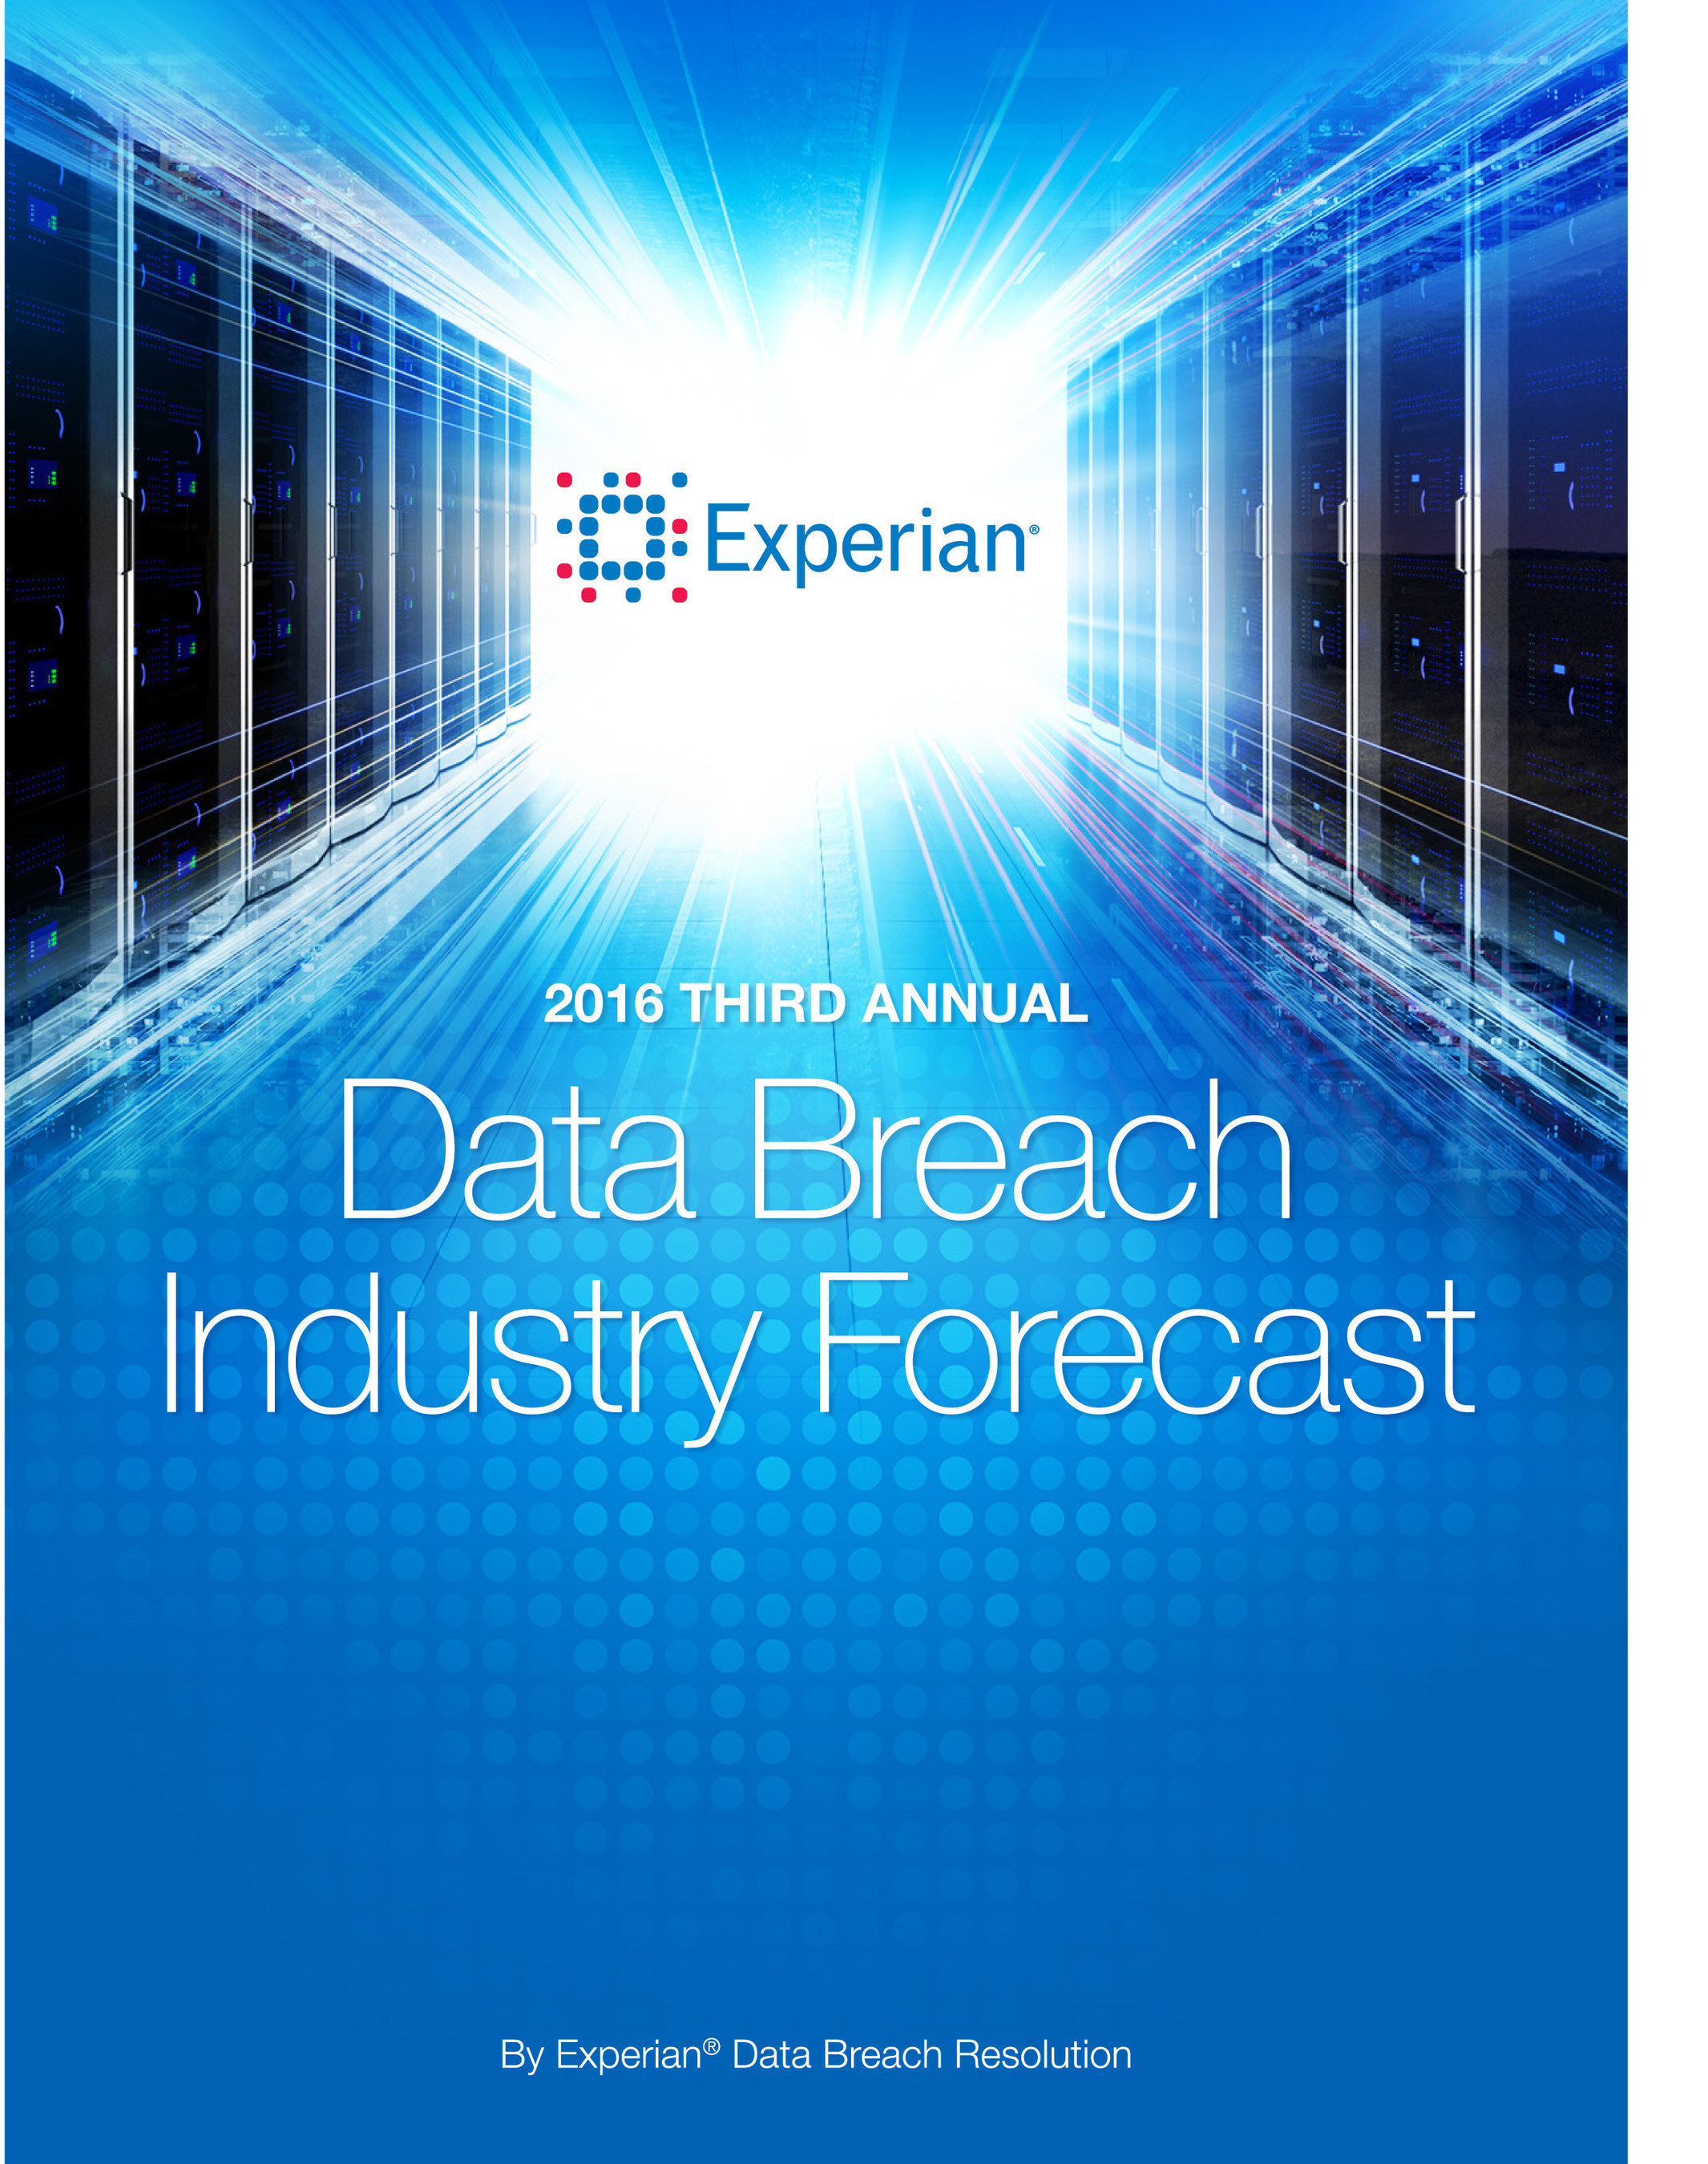 Experian Data Breach Resolution releases its third annual Data Breach Industry Forecast. Download the free report: http://bit.ly/1l05dq8